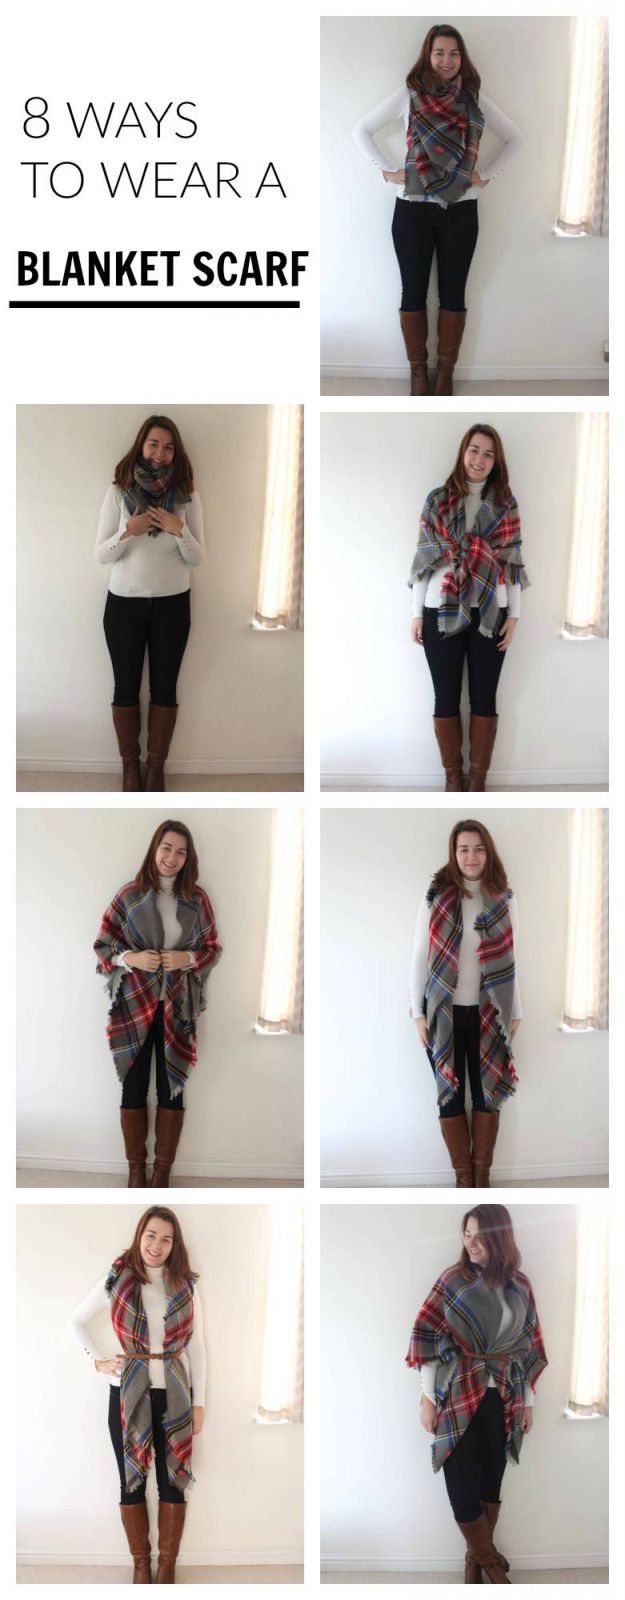 How to wear a blanket scarf